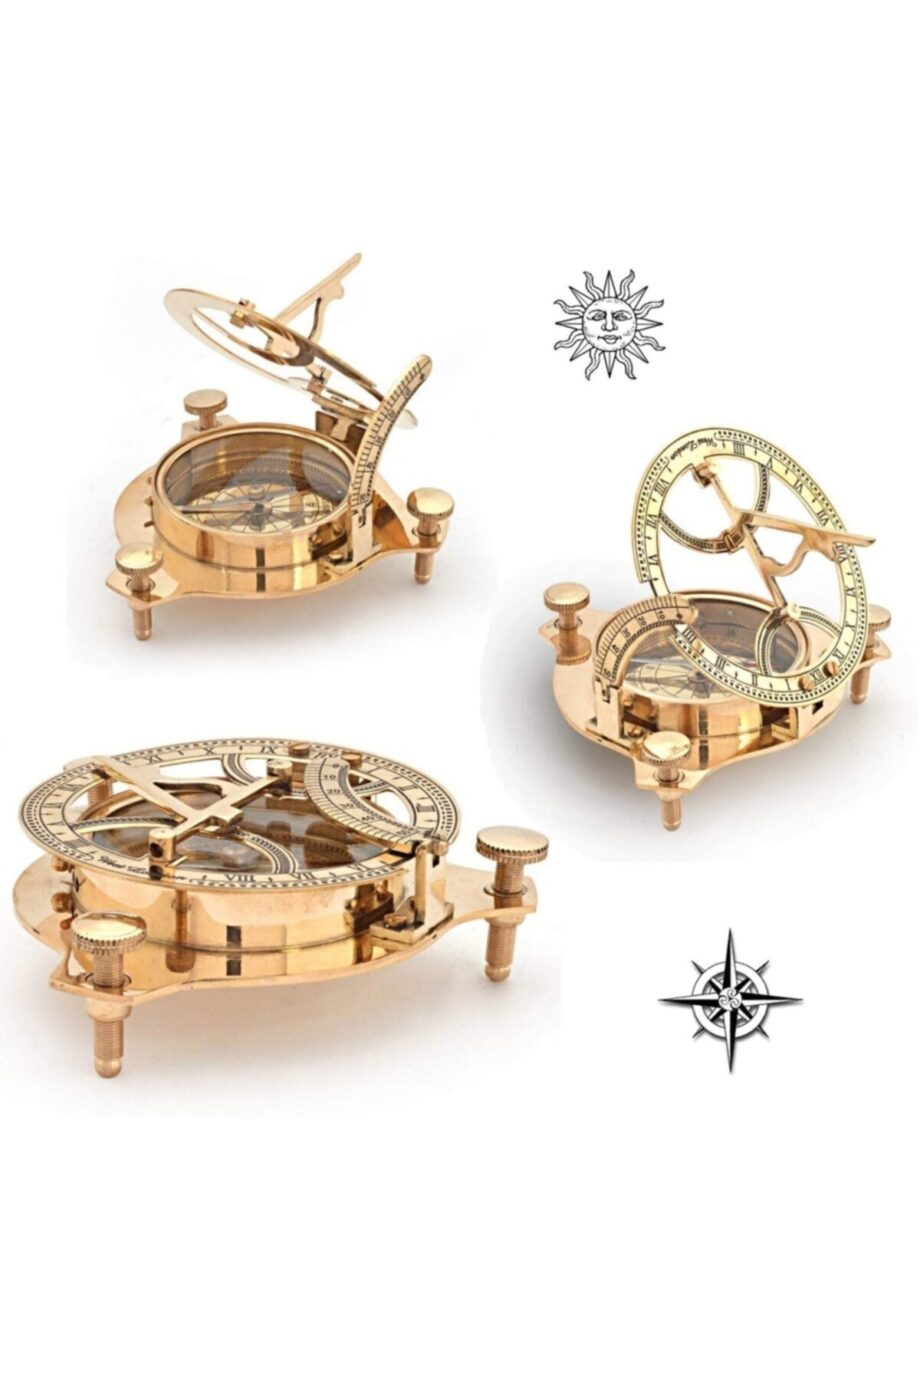 Compass with Sundial 12 cm Gift Boat Large Size Sailor Brass Working Marine Anchor Navigation Seafarer